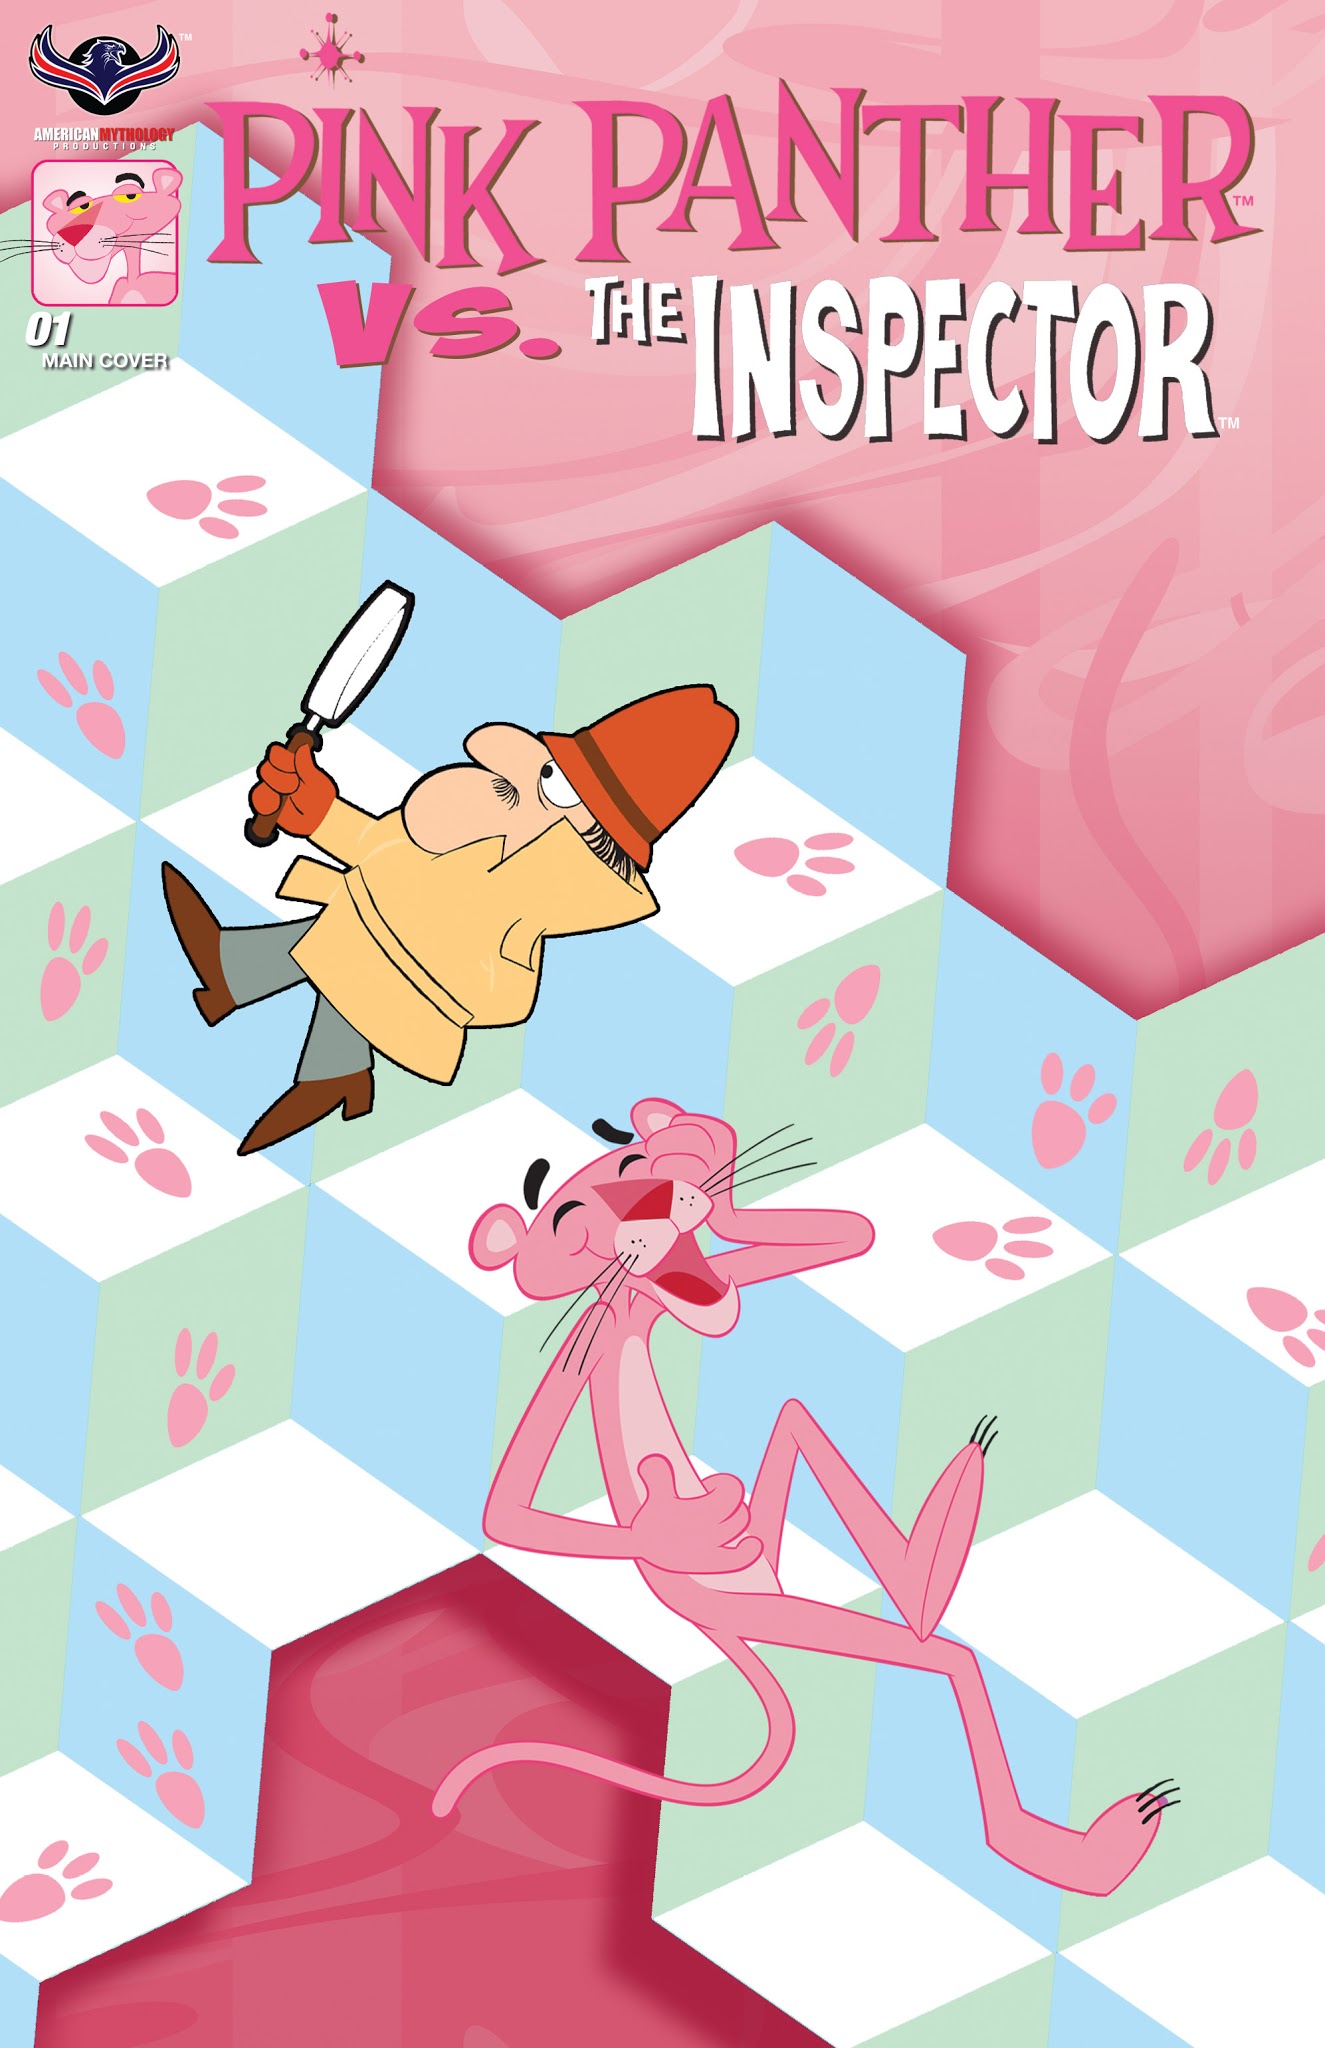 Read online Pink Panther vs. The Inspector comic -  Issue # Full - 1